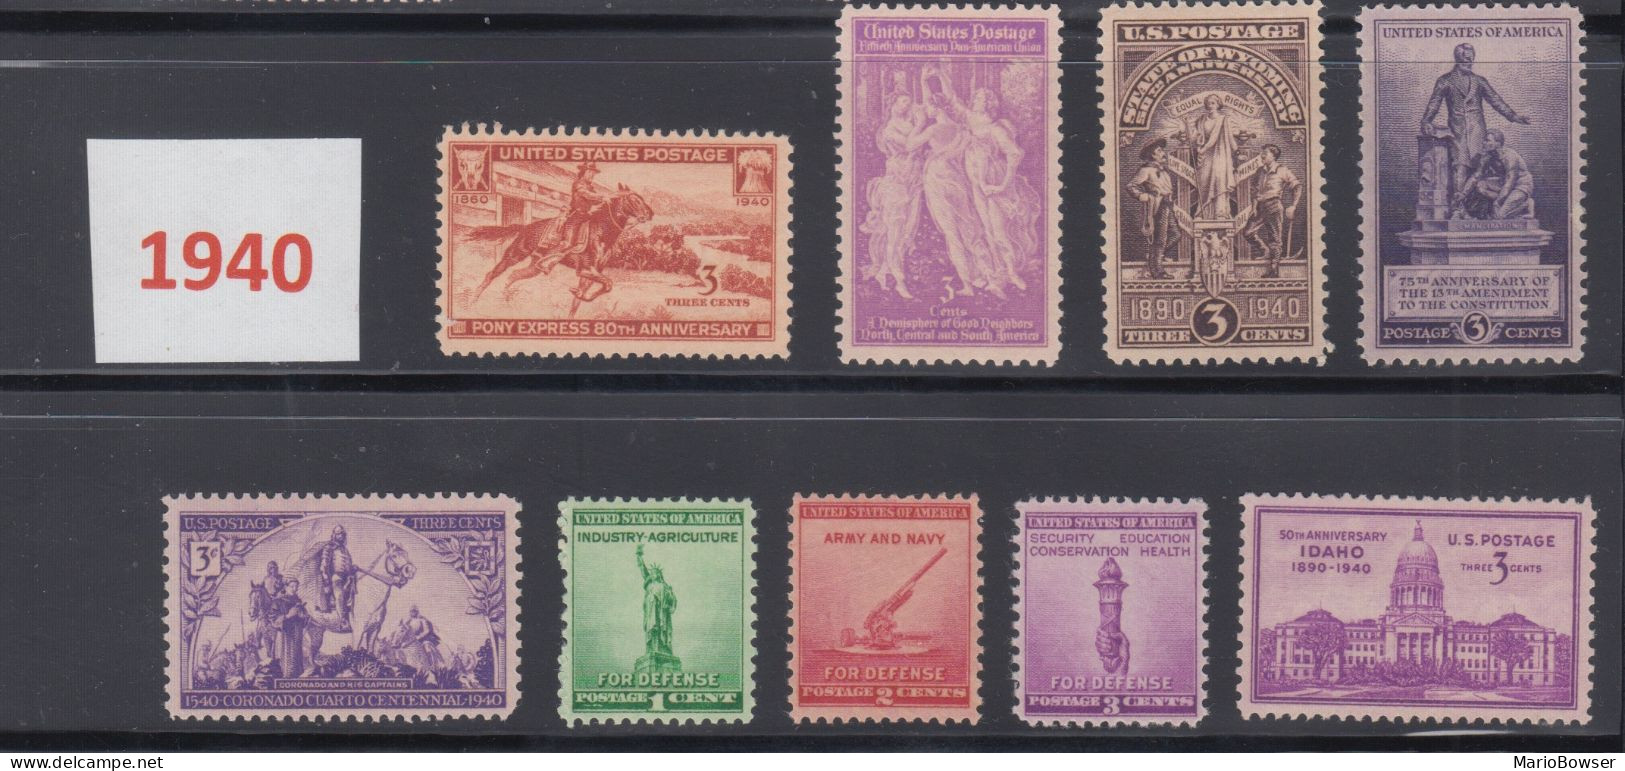 USA 1940 Full Year Commemorative MNH Stamps Set SC# 894-902 With 9 Stamps - Volledige Jaargang